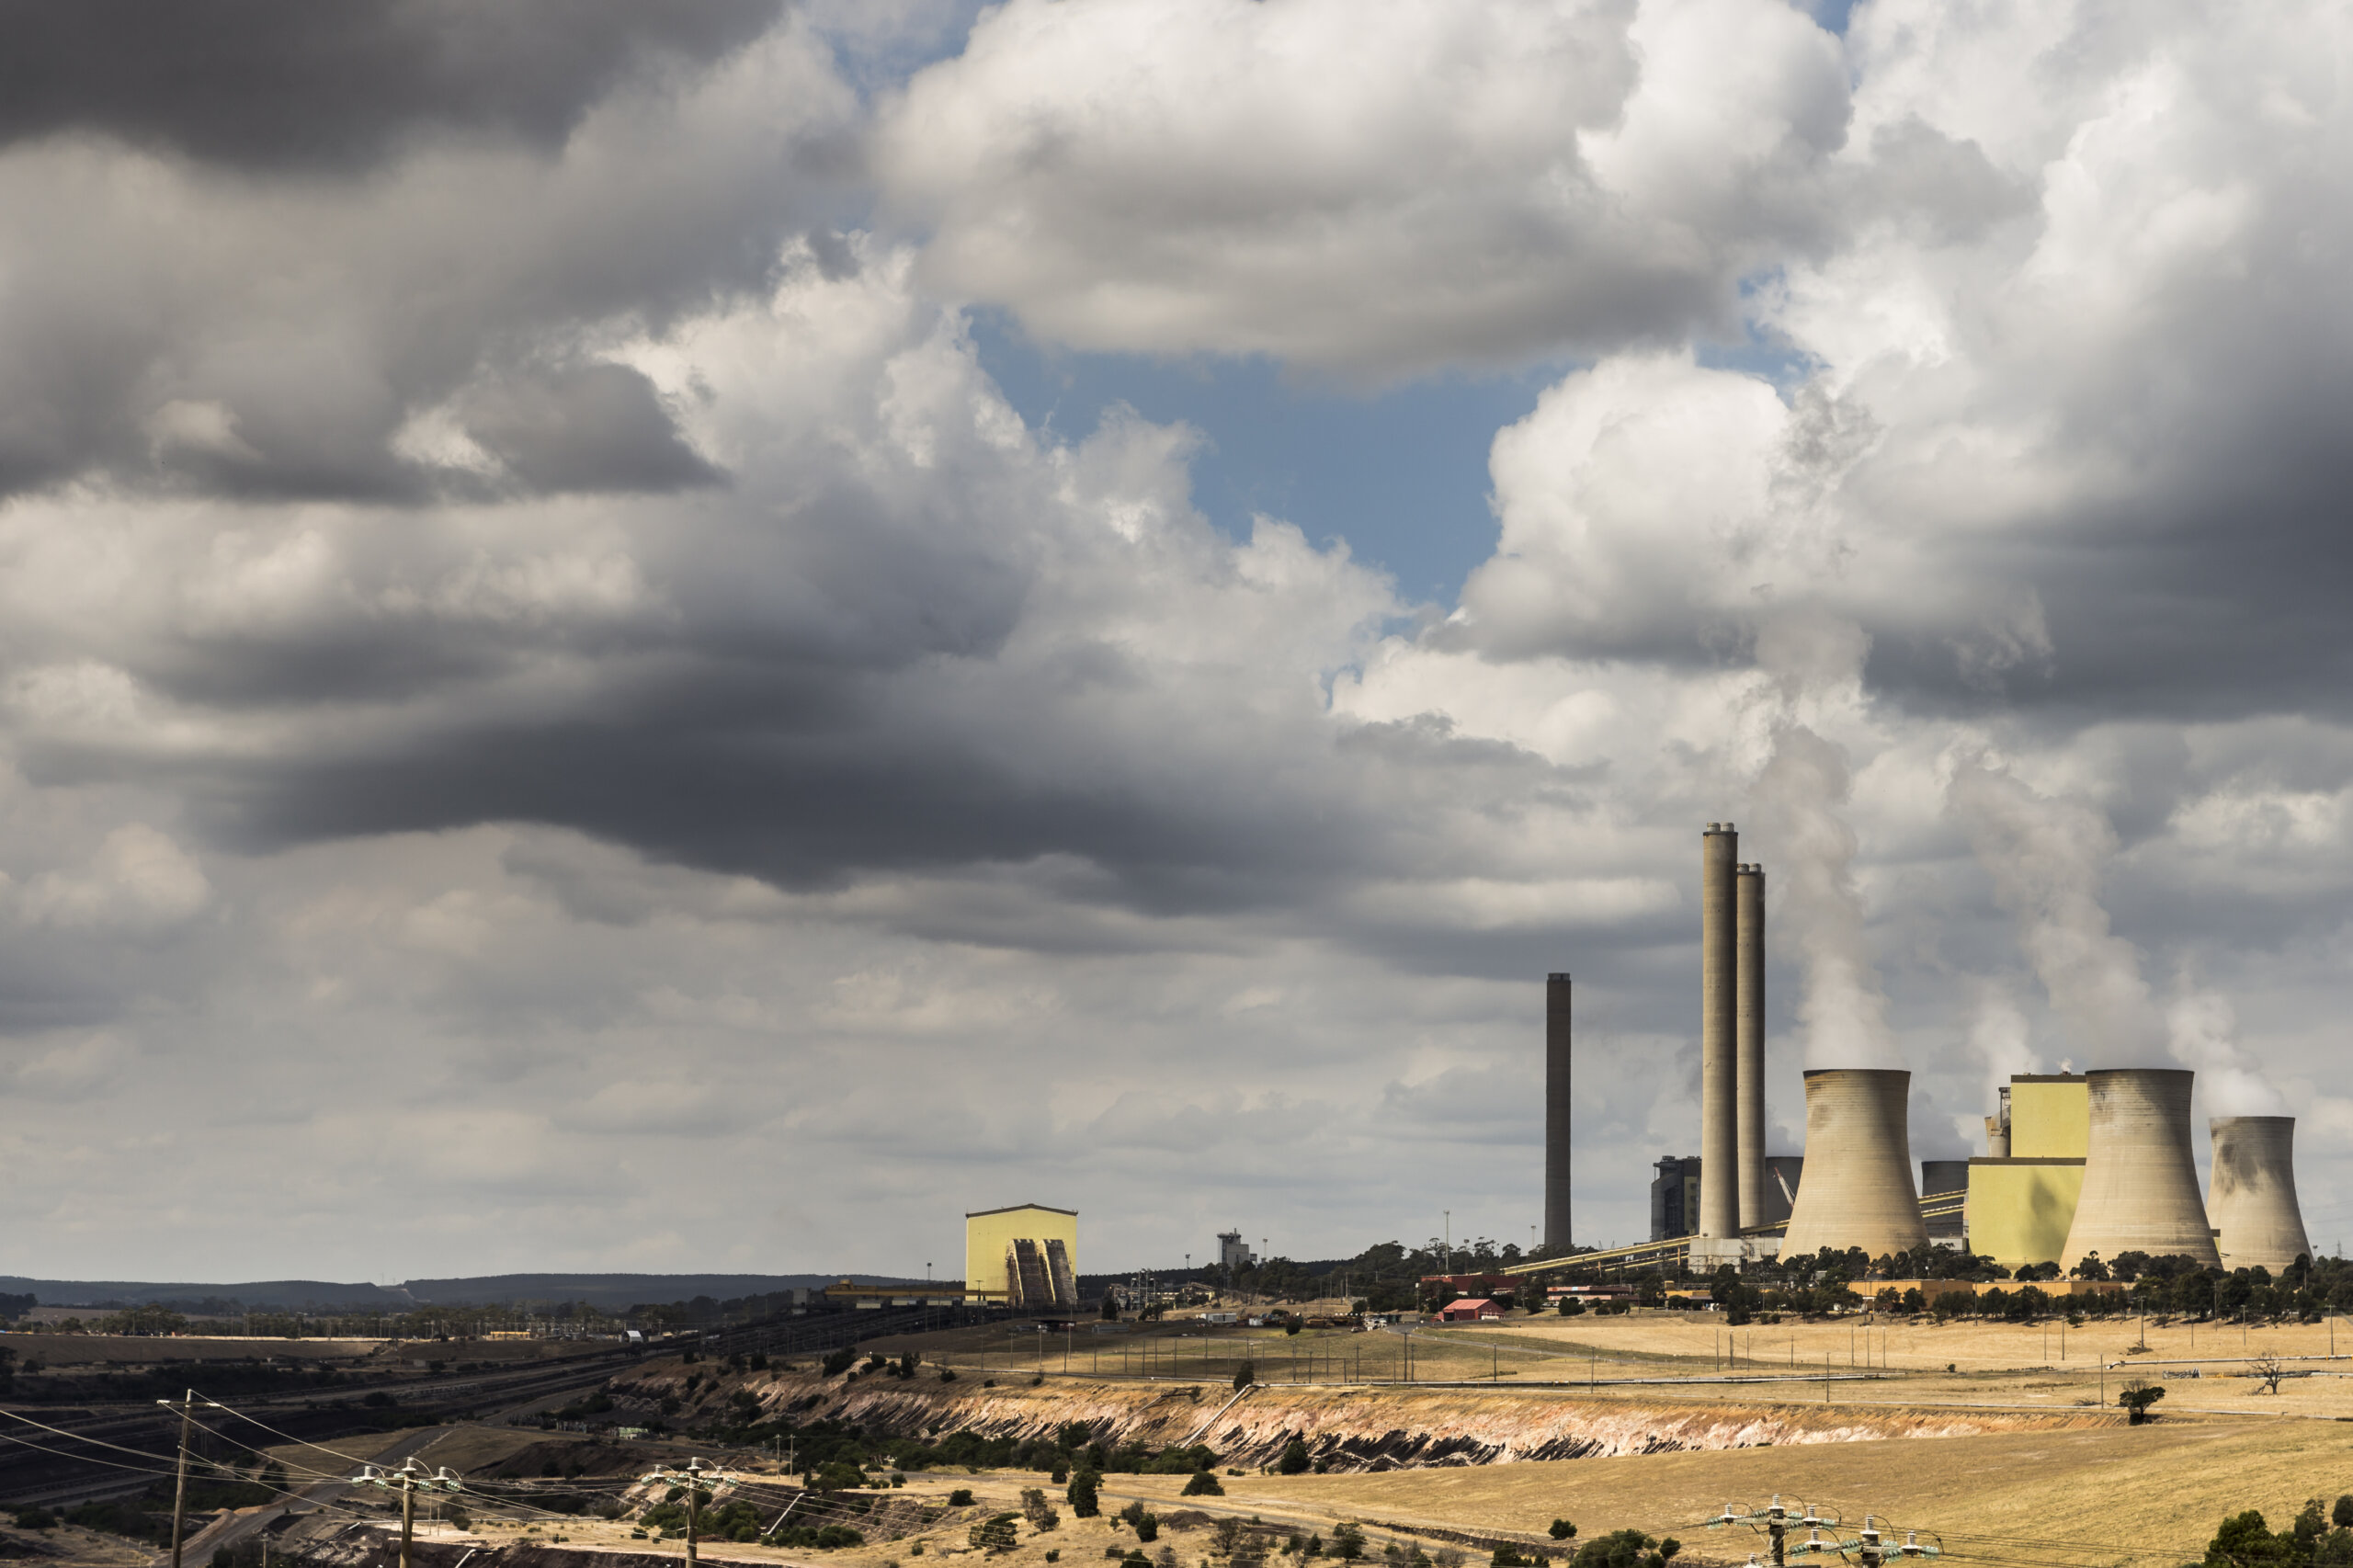 Loy Yang Power station in Victoria's Latrobe Valley